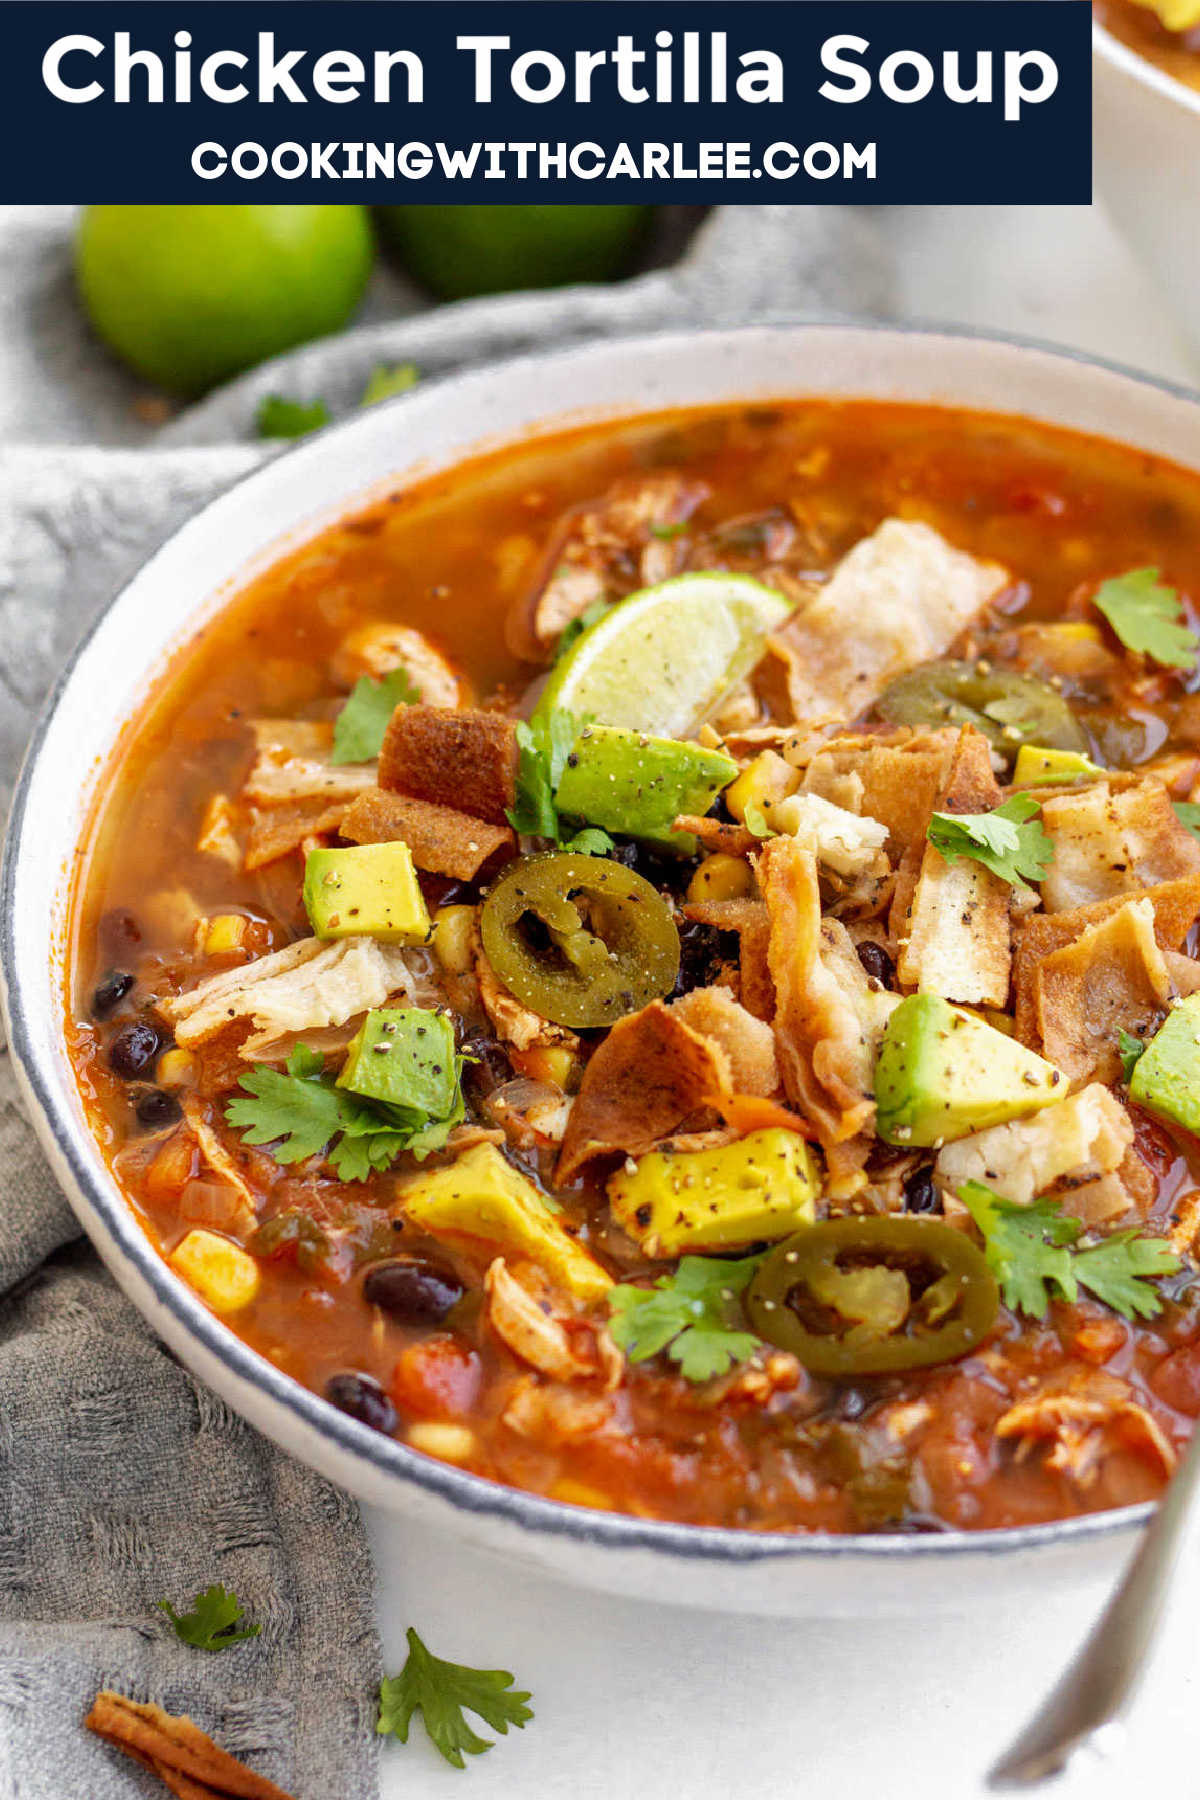 Chicken Tortilla Soup is a cozy & filling soup recipe full of shredded chicken, corn, beans and other delicious ingredients that are simmered in a tomato base. Top the soup generously with homemade tortilla chips, cilantro, avocado, lime and a dollop of sour cream and you got yourself a perfect Mexican-inspired soup which is the perfect easy weeknight dinner.